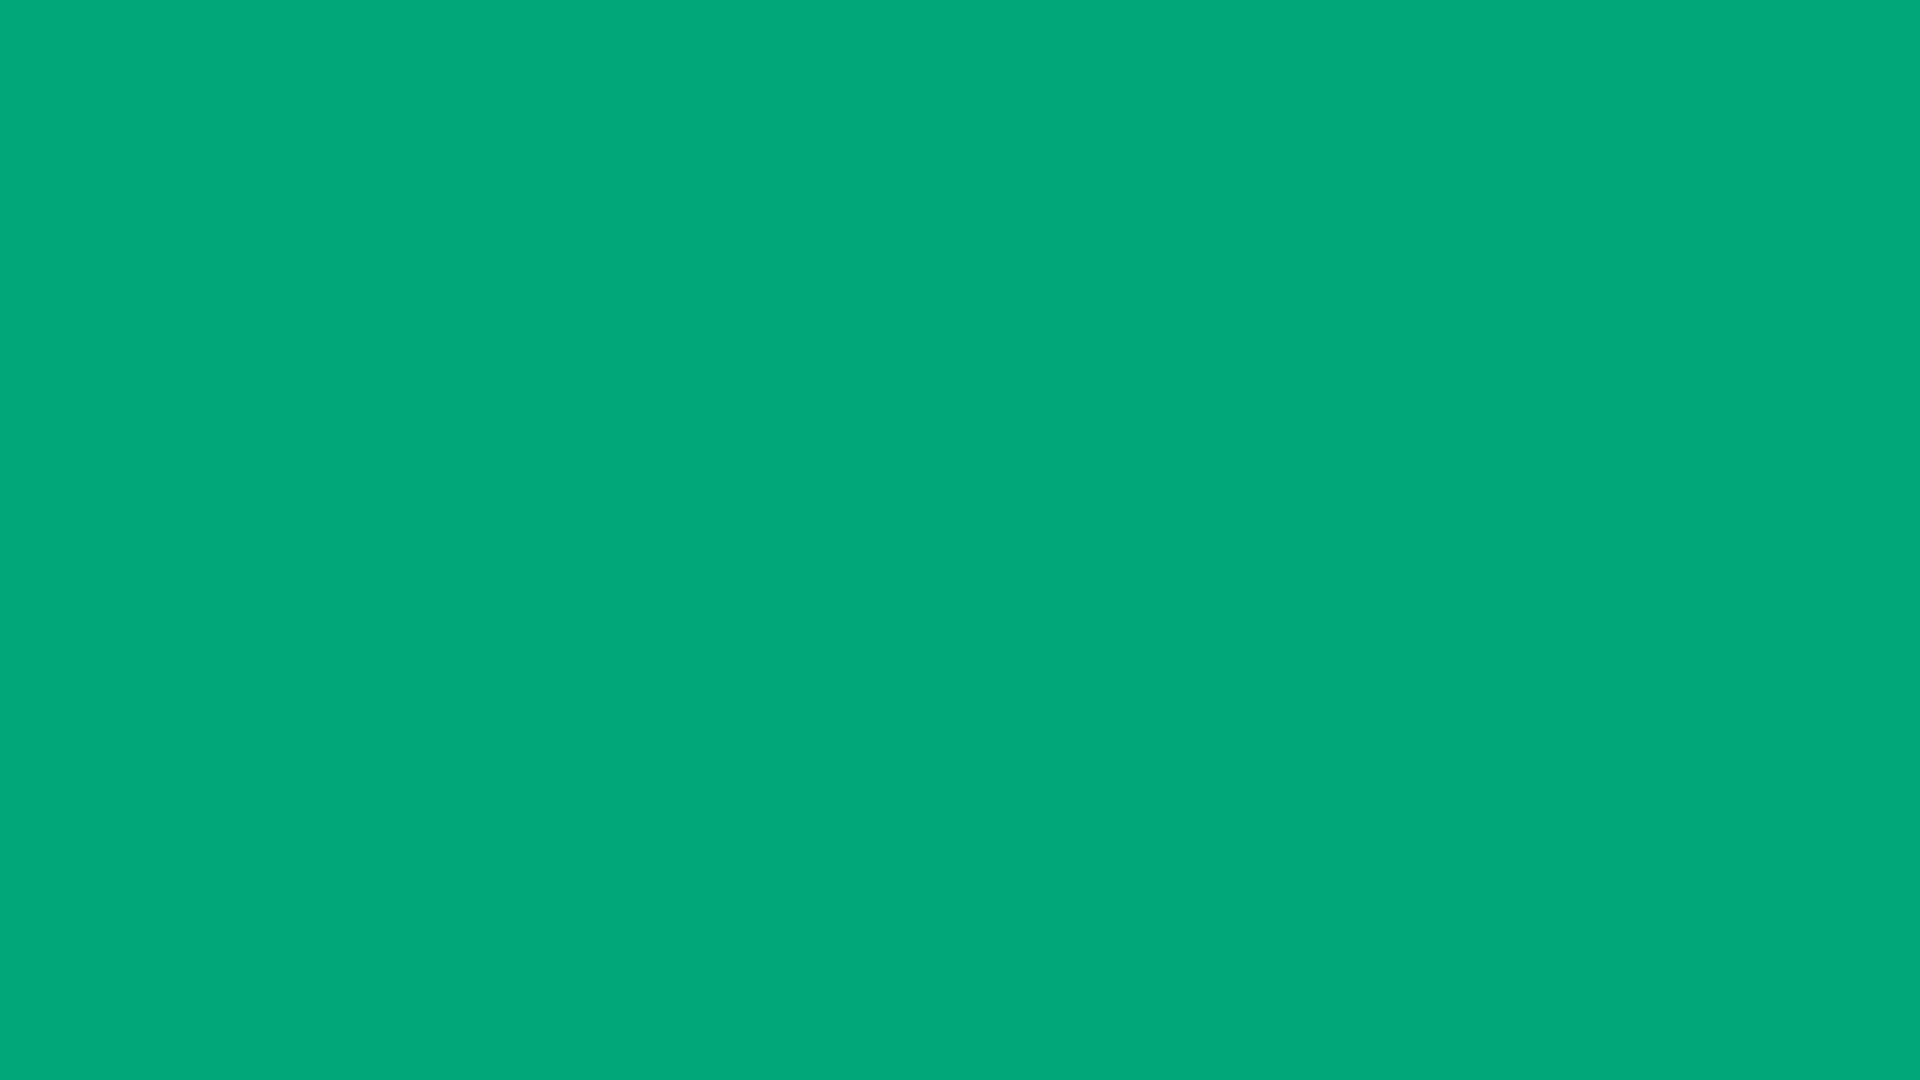 1920x1080 Green Munsell Solid Color Background